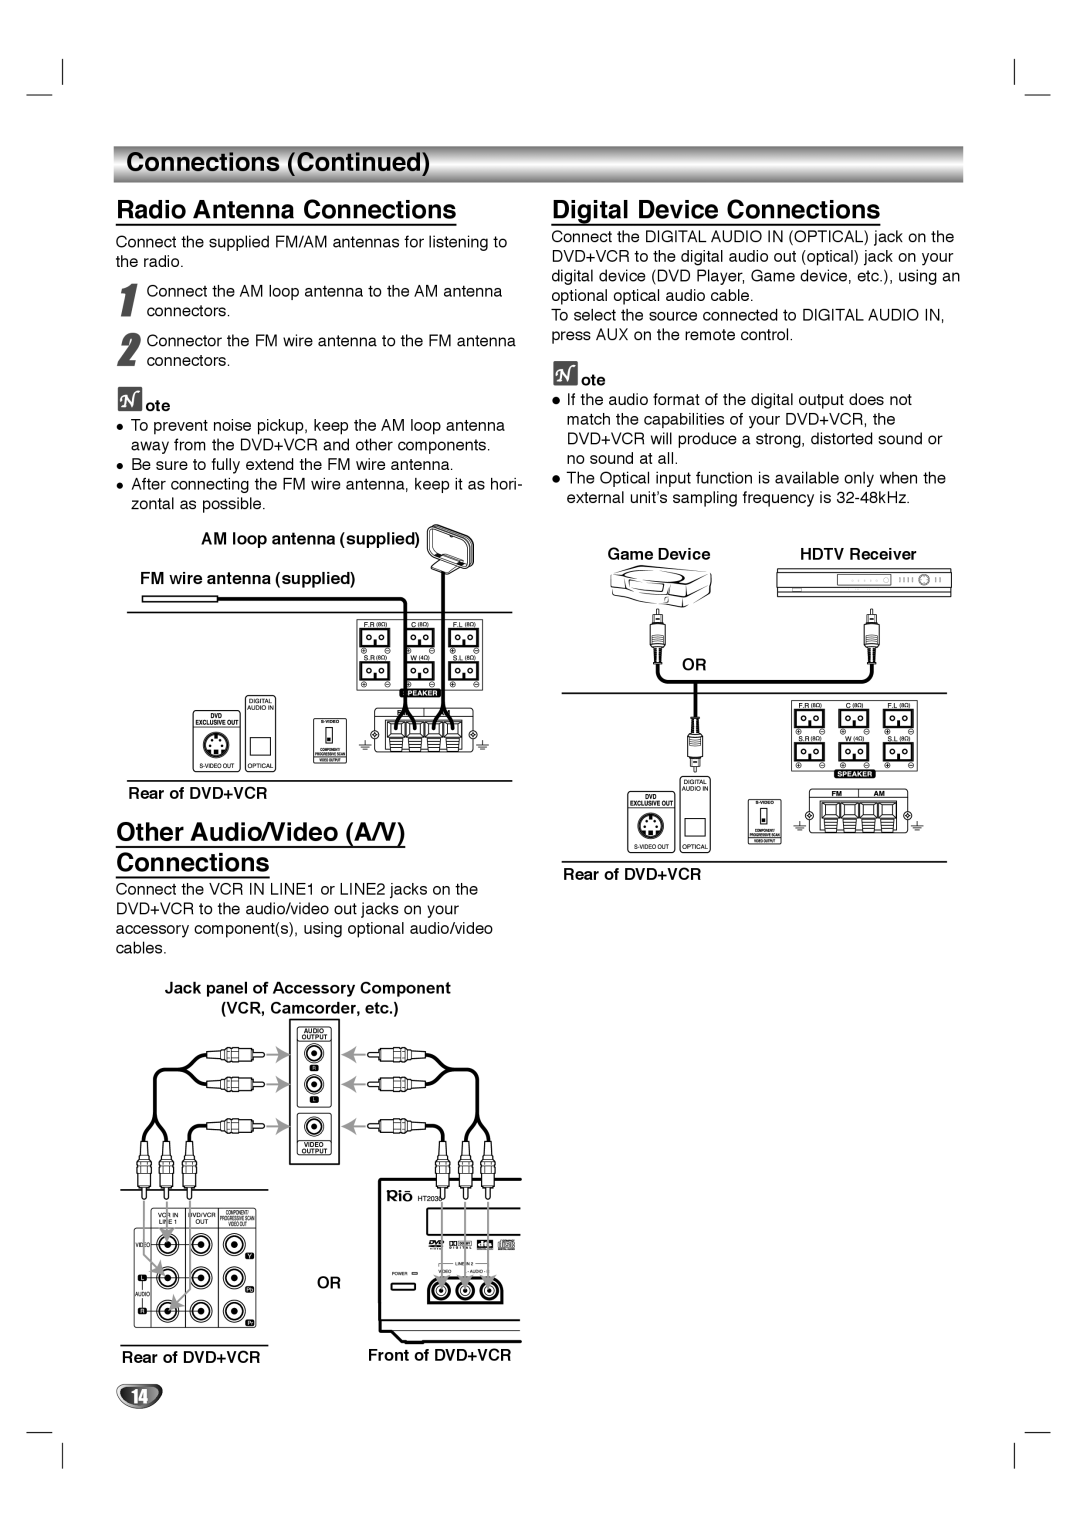 Dolby Laboratories HT2030 manual Connections Continued Radio Antenna Connections, Other Audio/Video A/V Connections 